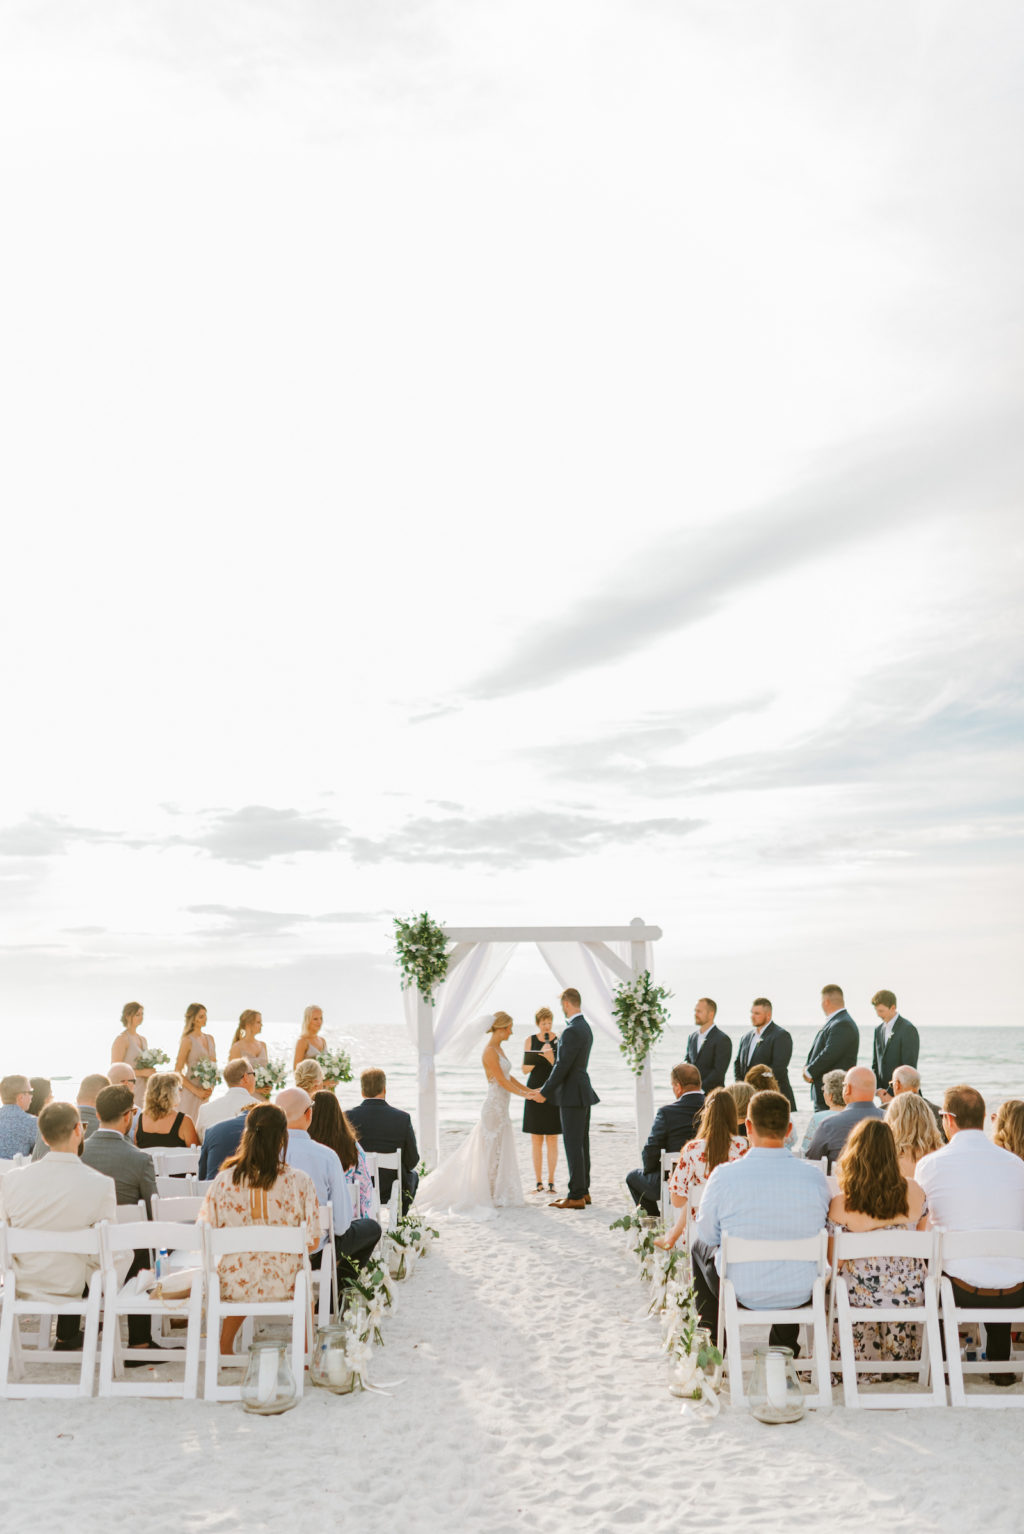 Florida Bride and Groom Exchanging Wedding Vows on Beach | Tampa Wedding Venue The Resort at Longboat Key Club